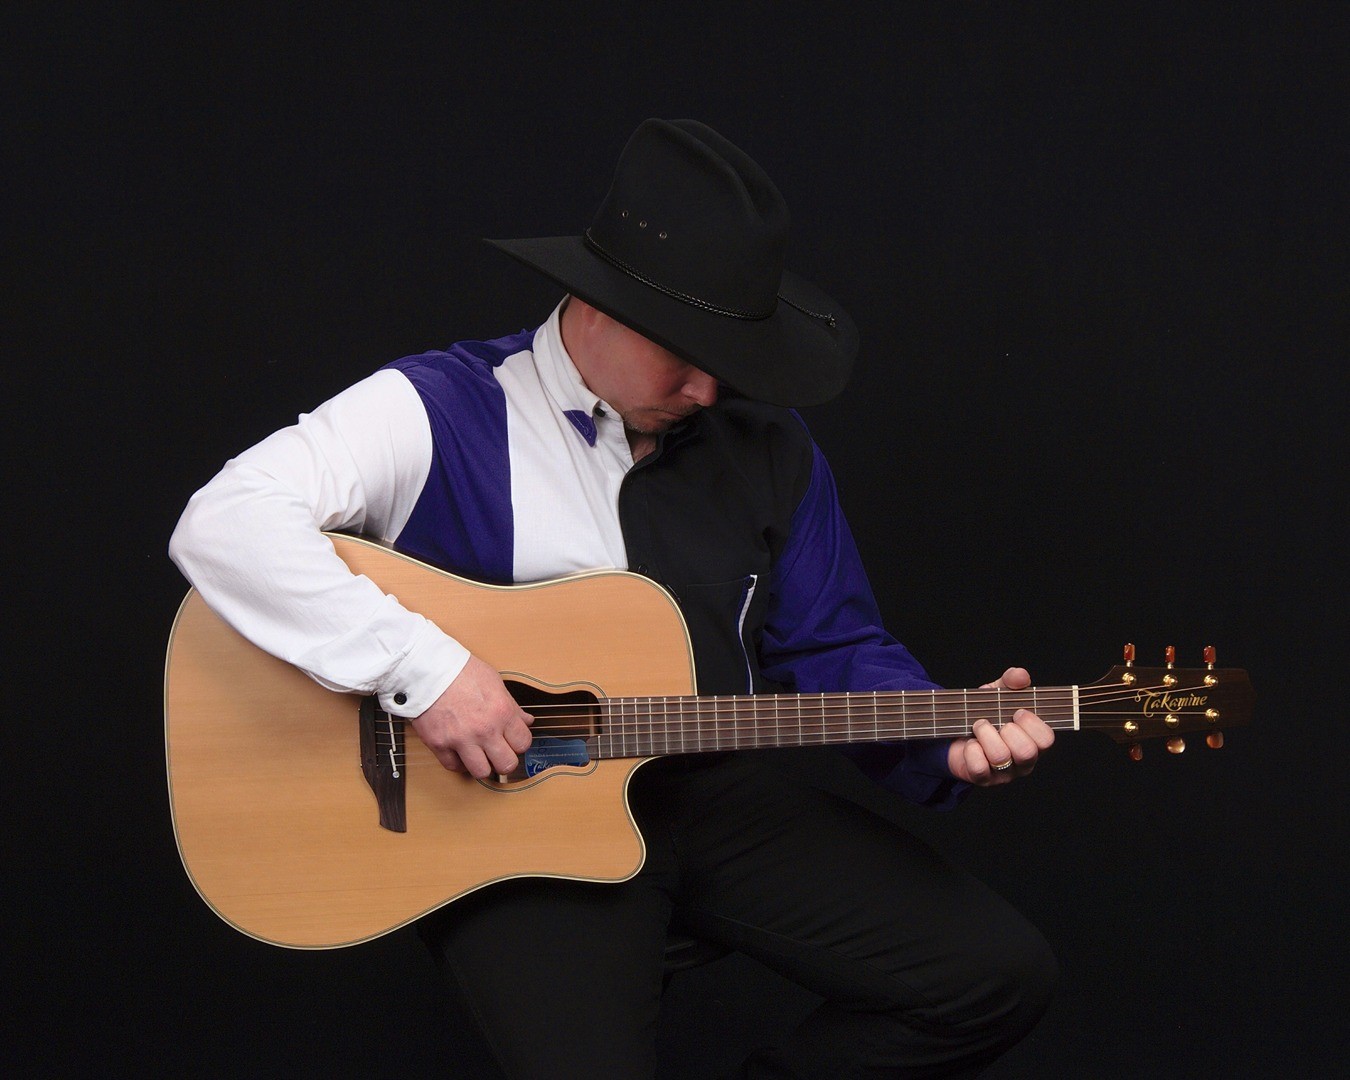 The Ultimate Garth Brooks Tribute featuring Shawn Gerhard